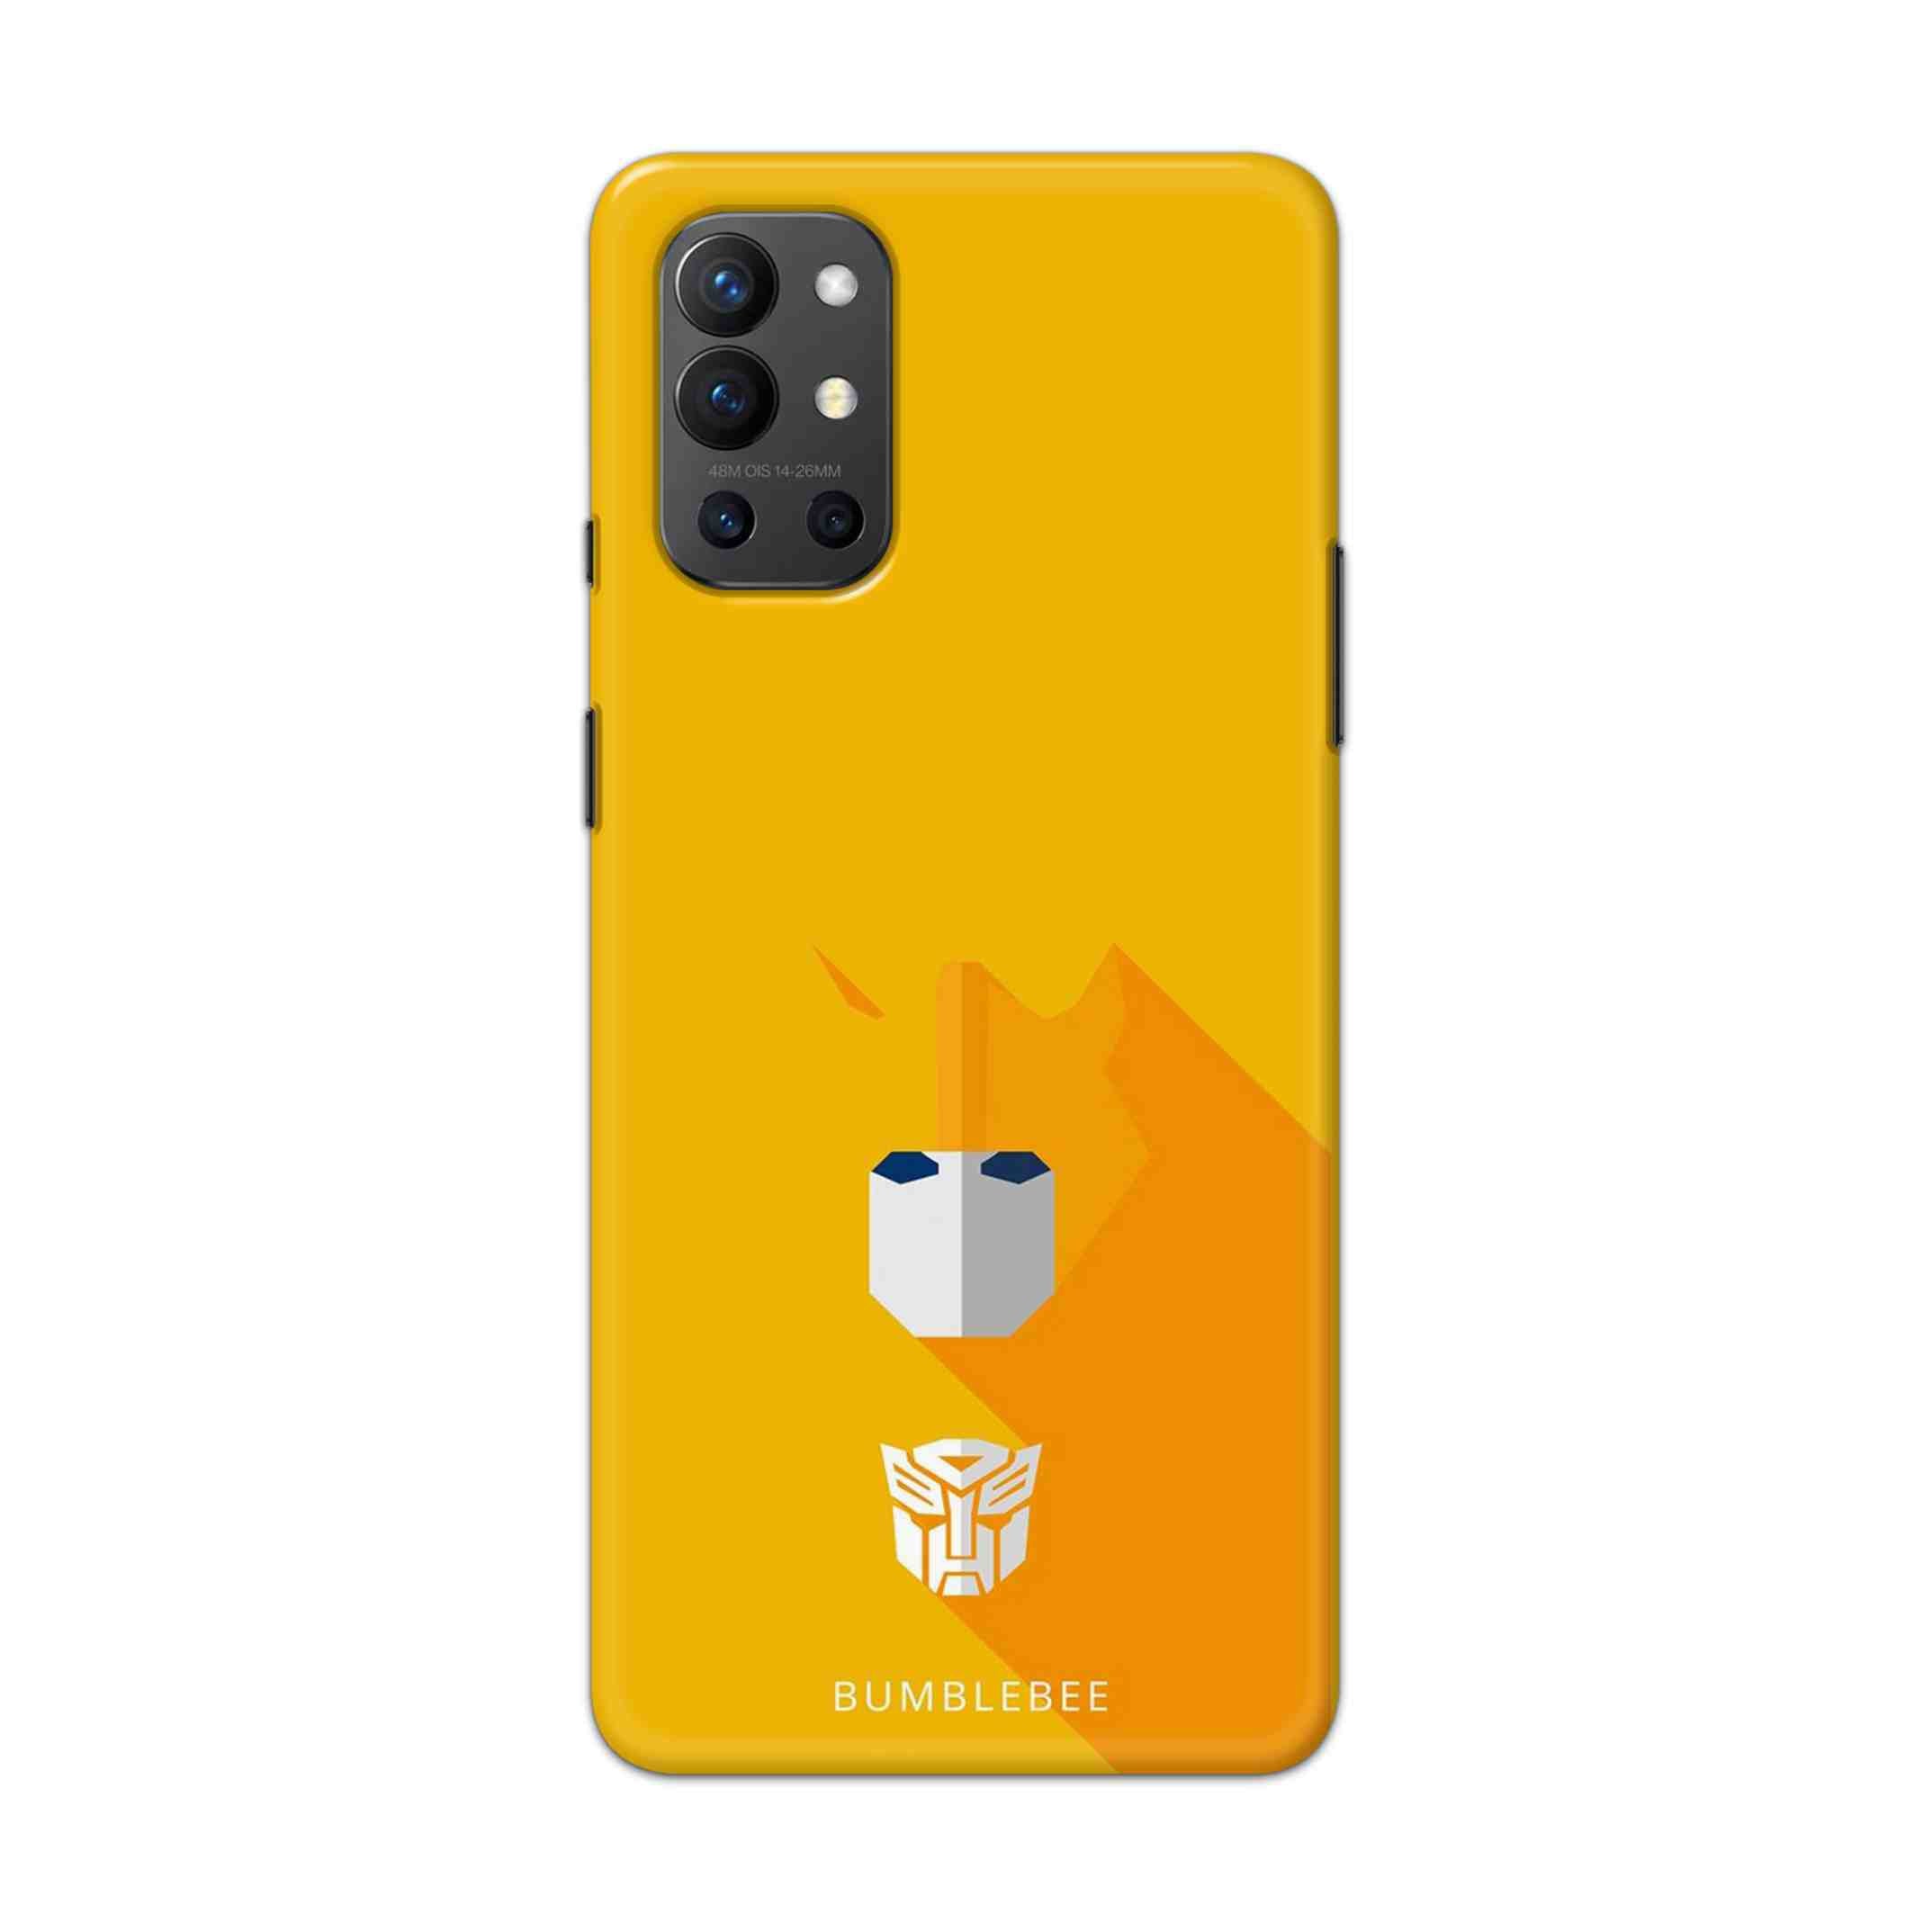 Buy Transformer Hard Back Mobile Phone Case Cover For OnePlus 9R / 8T Online